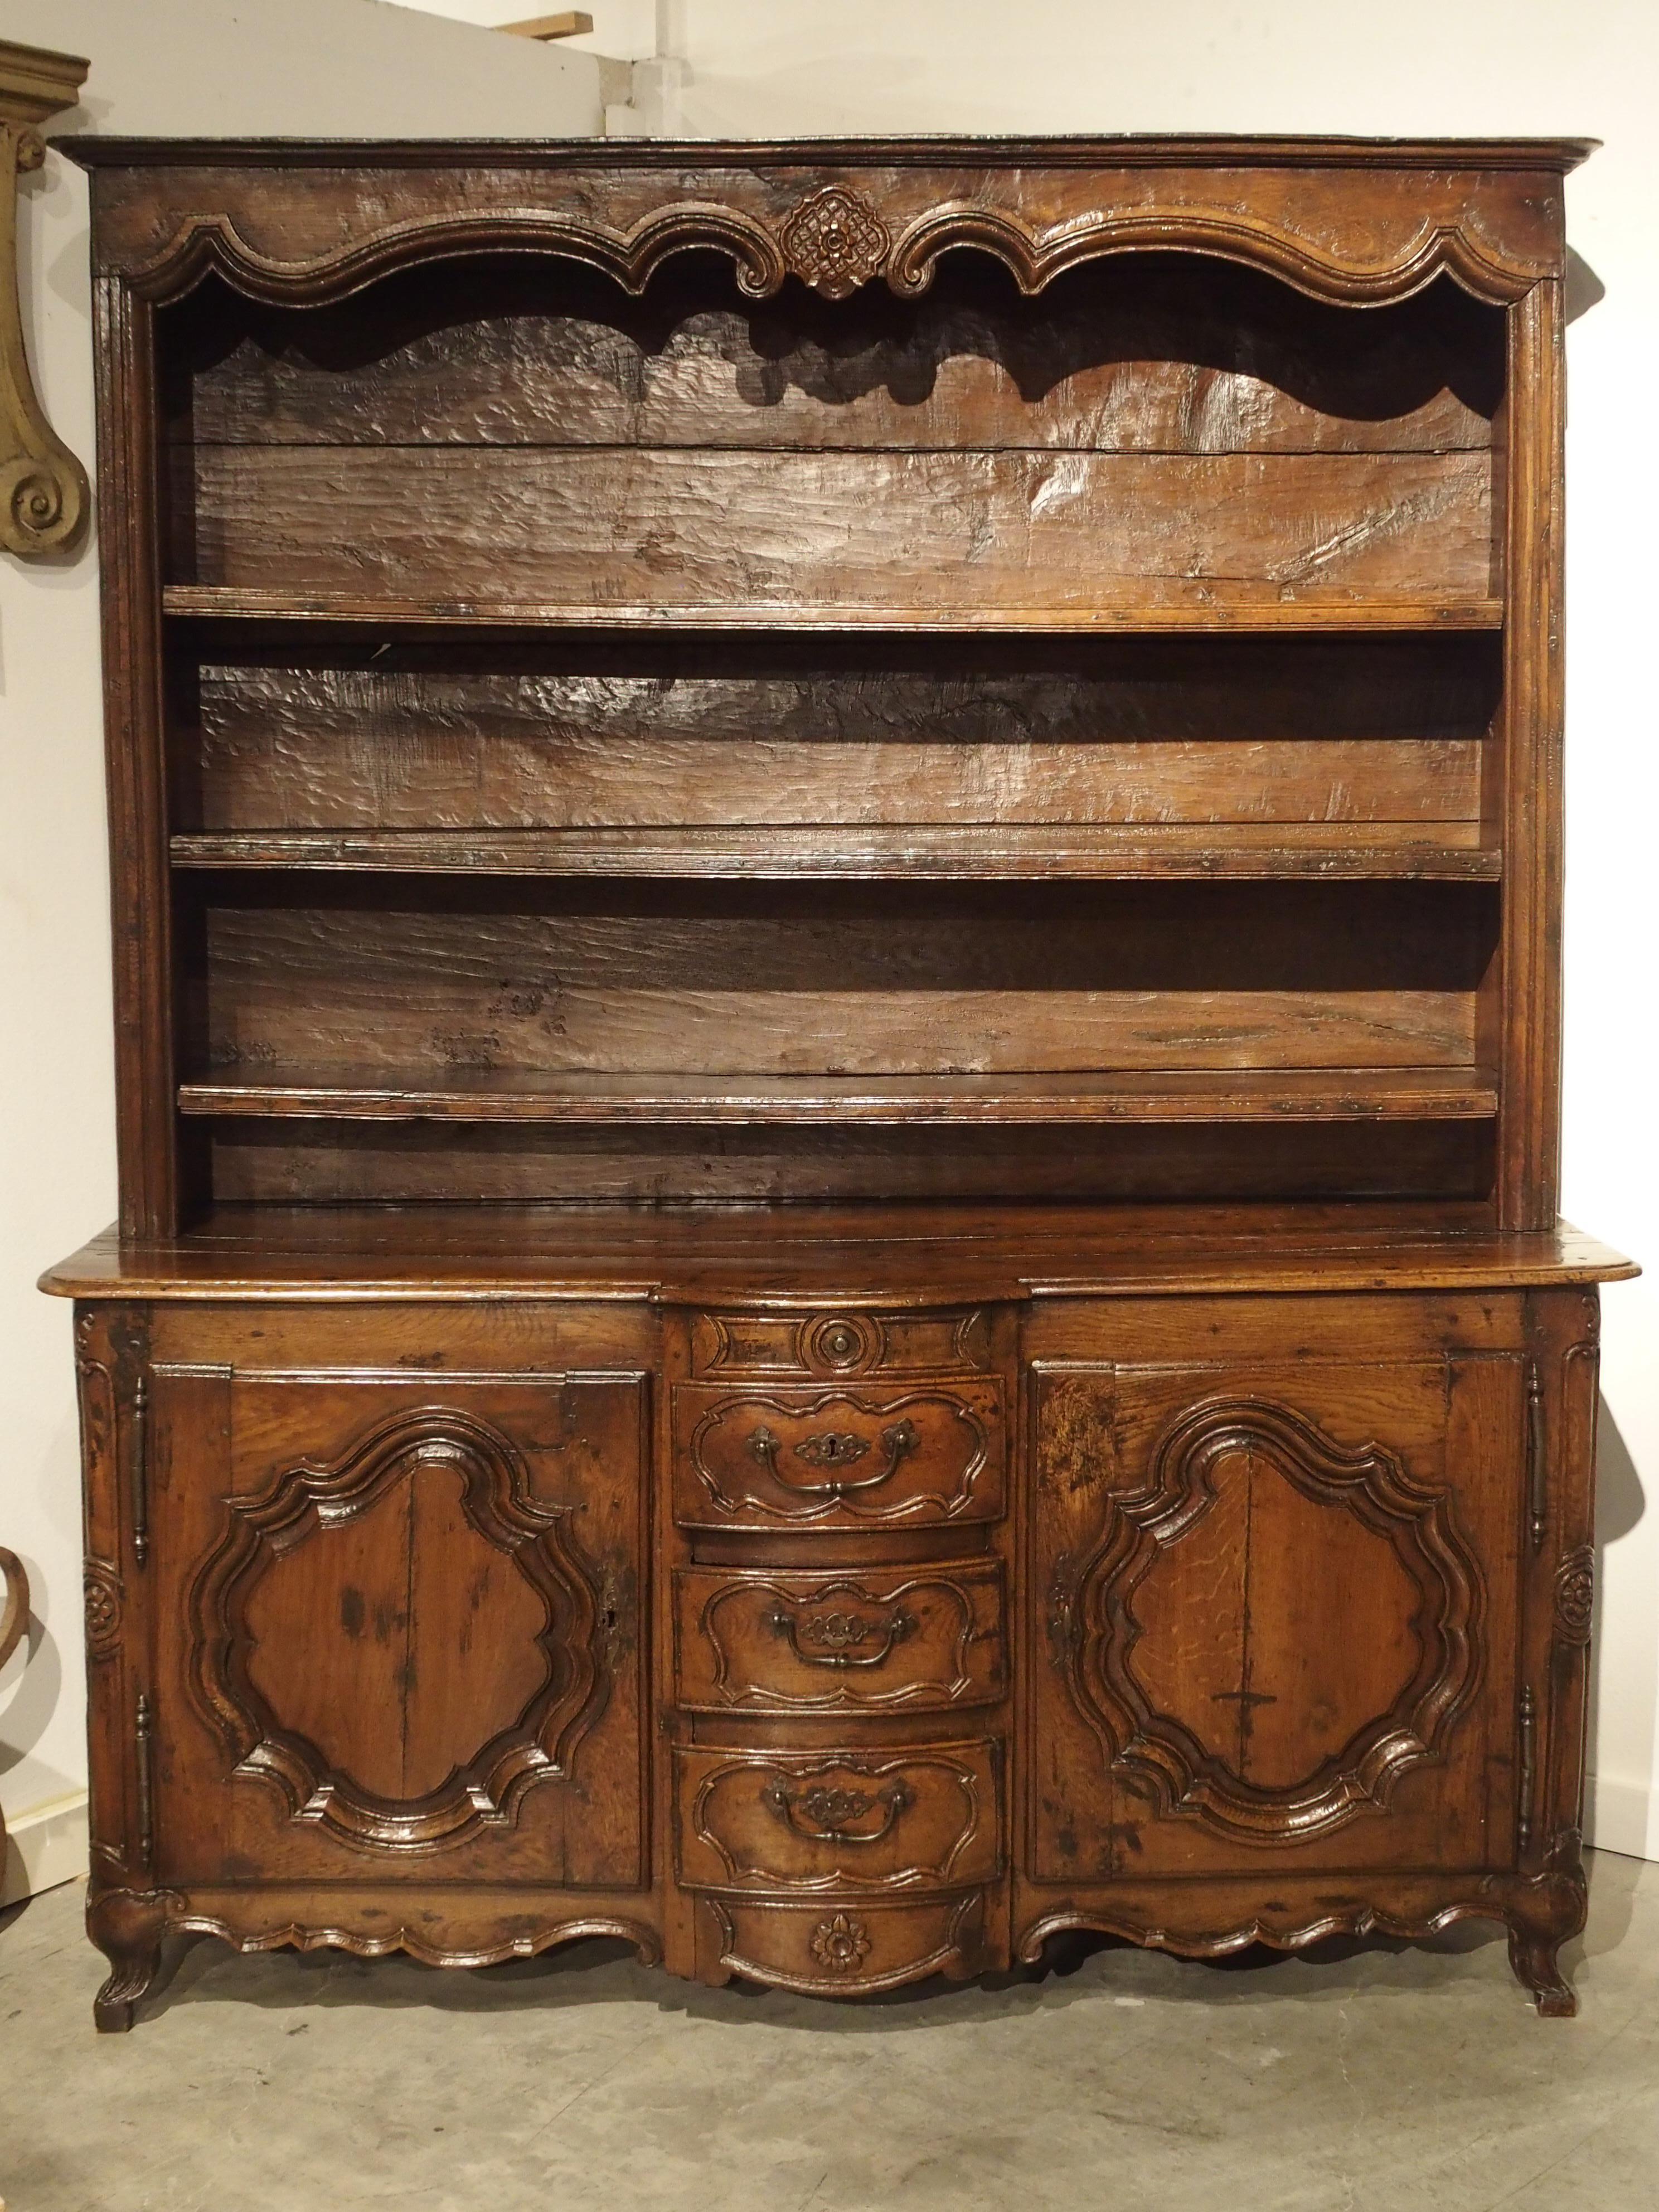 Vaisseliers have their origins with French country cabinetmakers in the very late 1600’s. Our vaisselier falls squarely into this category, as one of the earliest produced. During this period, they were reserved for the Noble and Bourgeoisie classes